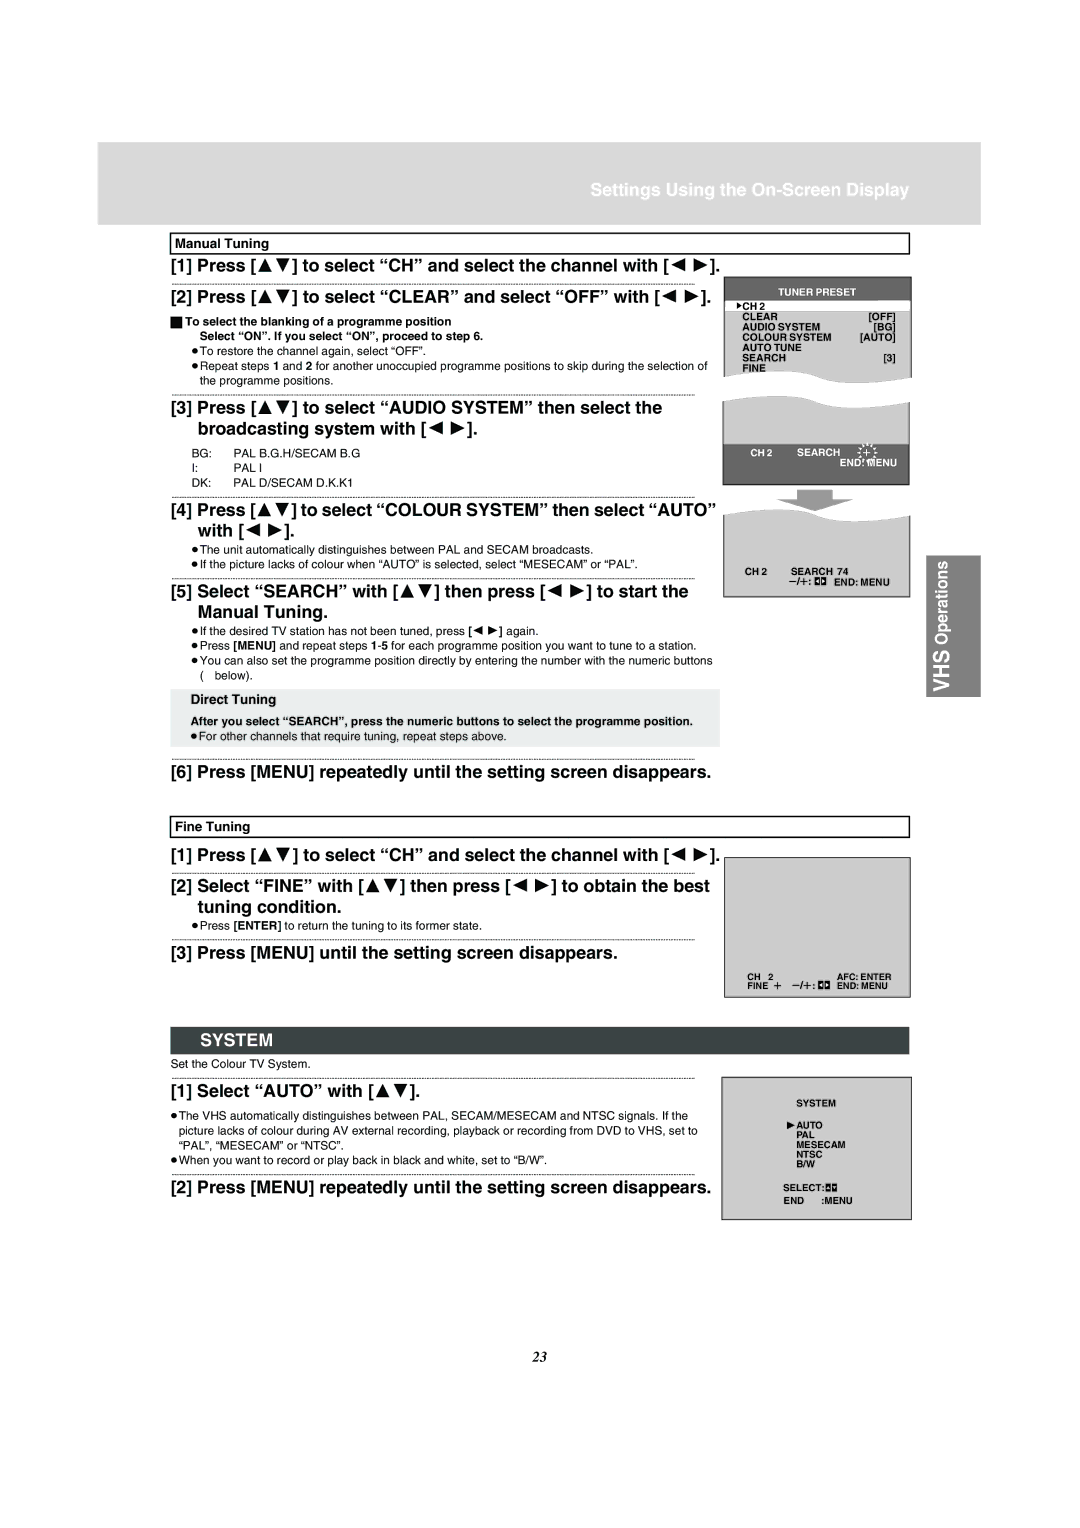 Panasonic VP-31GN manual Settings Using the On-Screen Display, System 